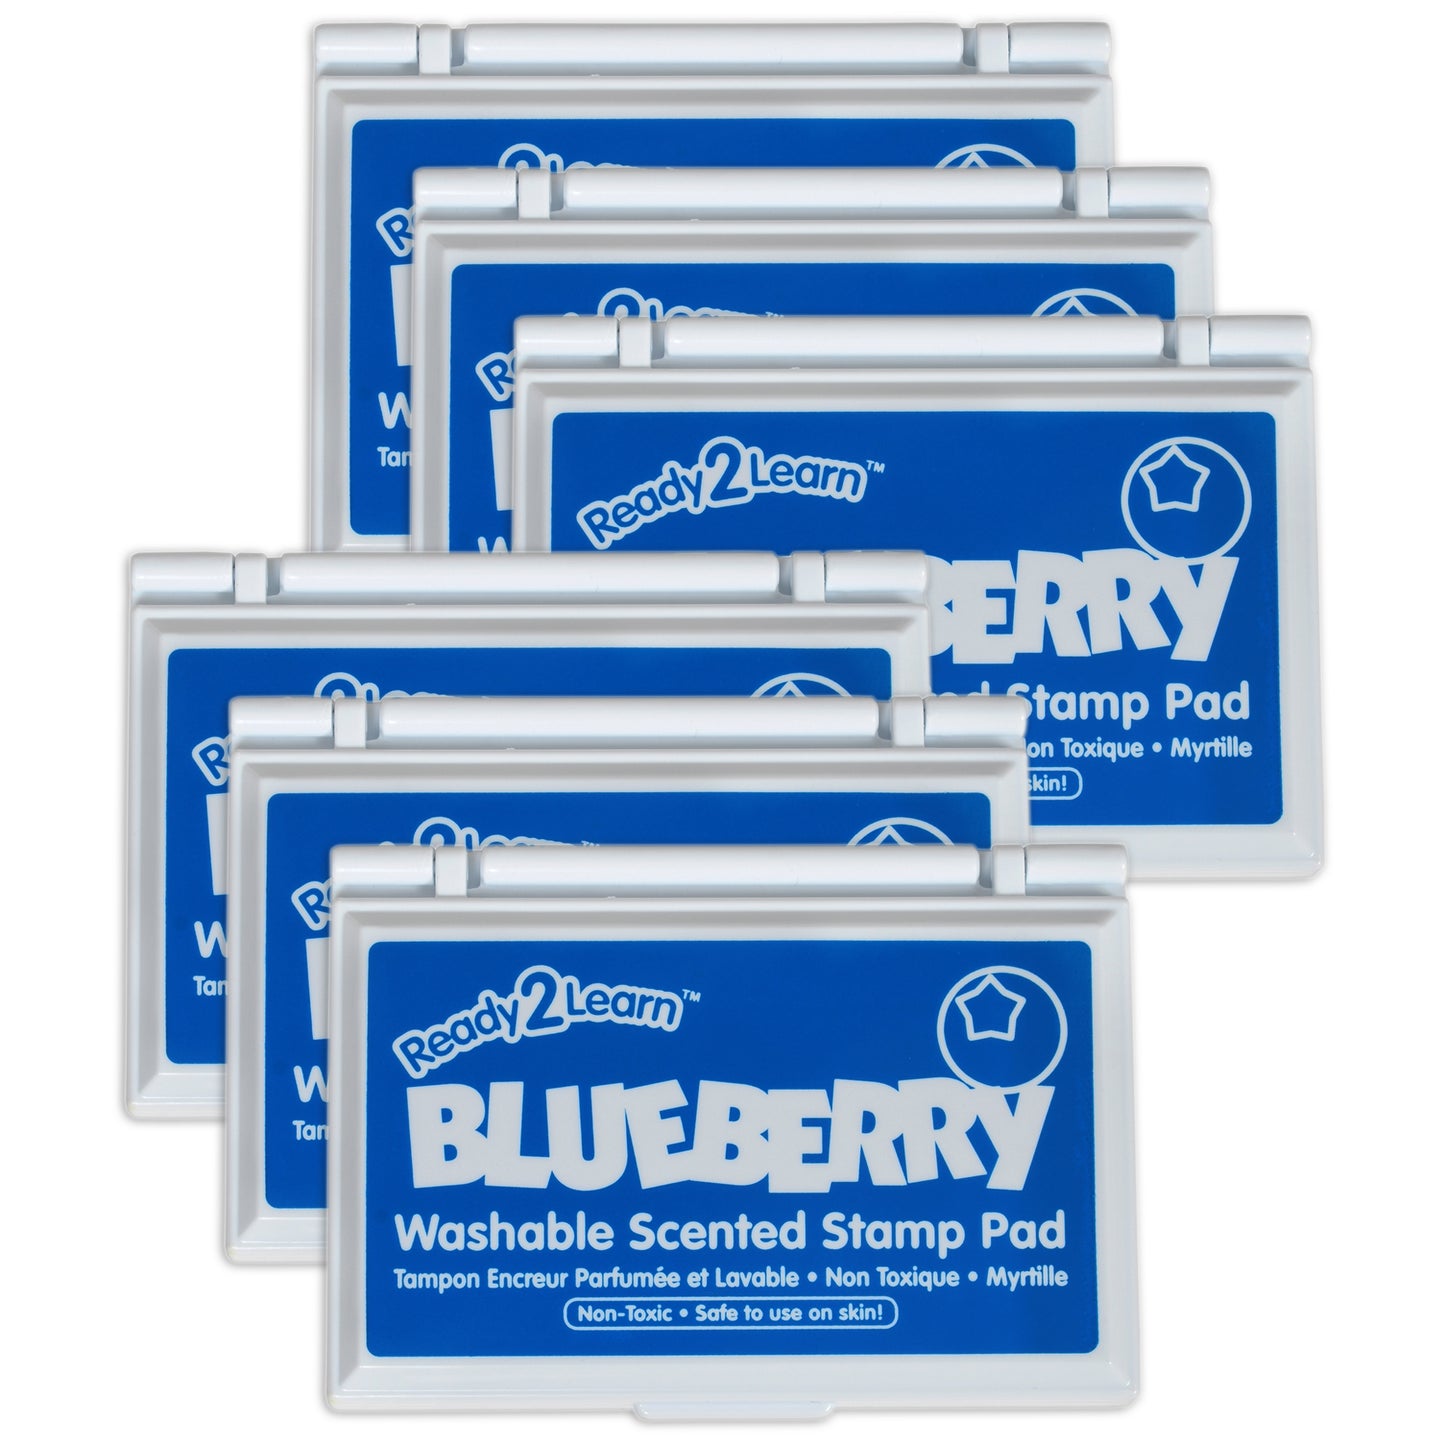 Washable Stamp Pad - Blueberry Scented, Blue - Pack of 6